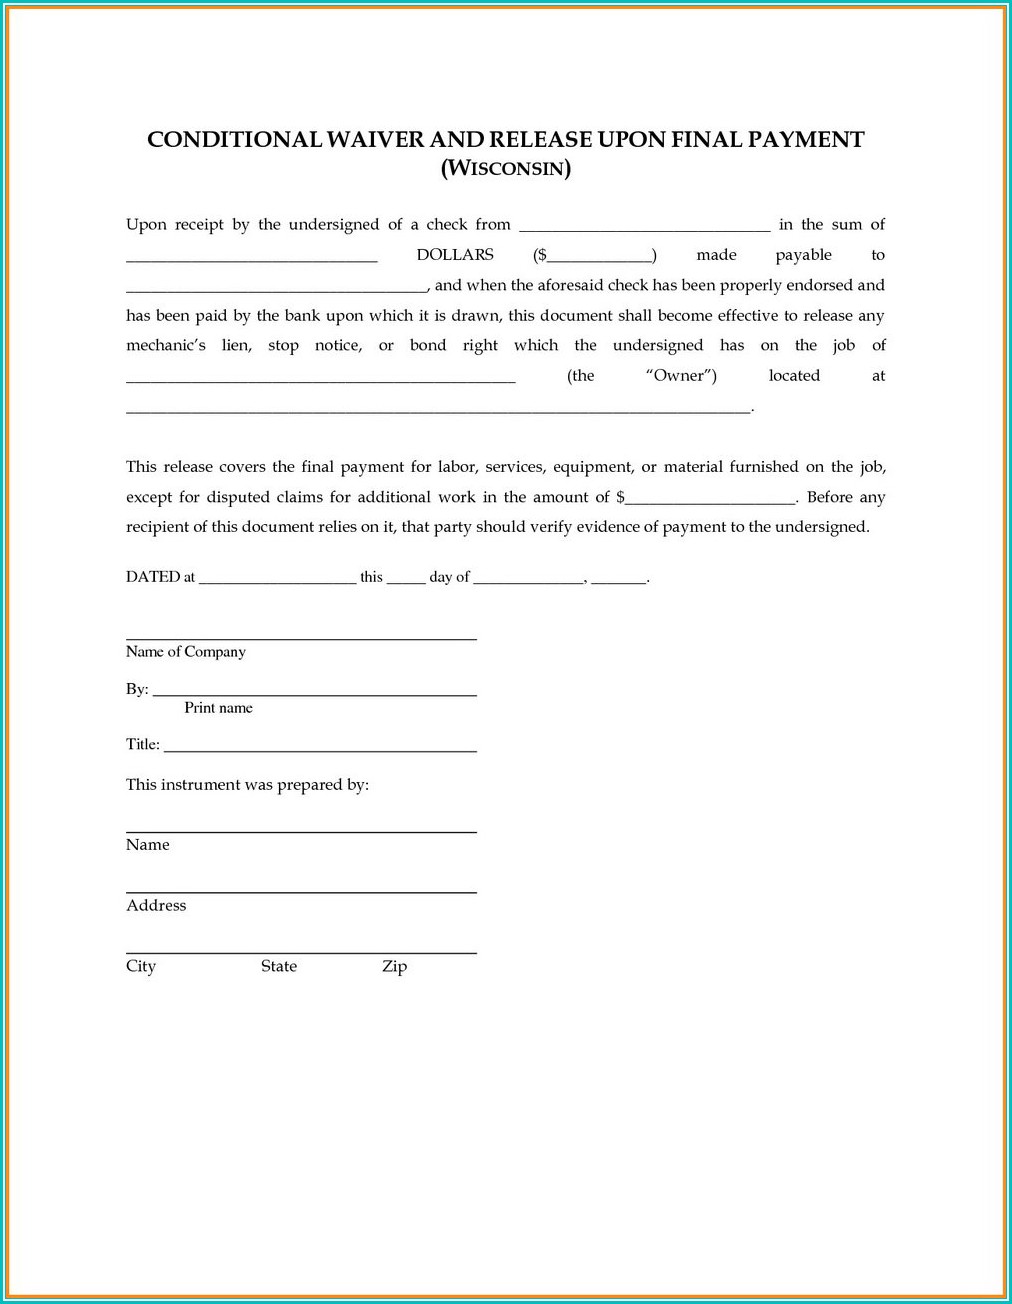 subcontractor-lien-waiver-form-illinois-form-resume-examples